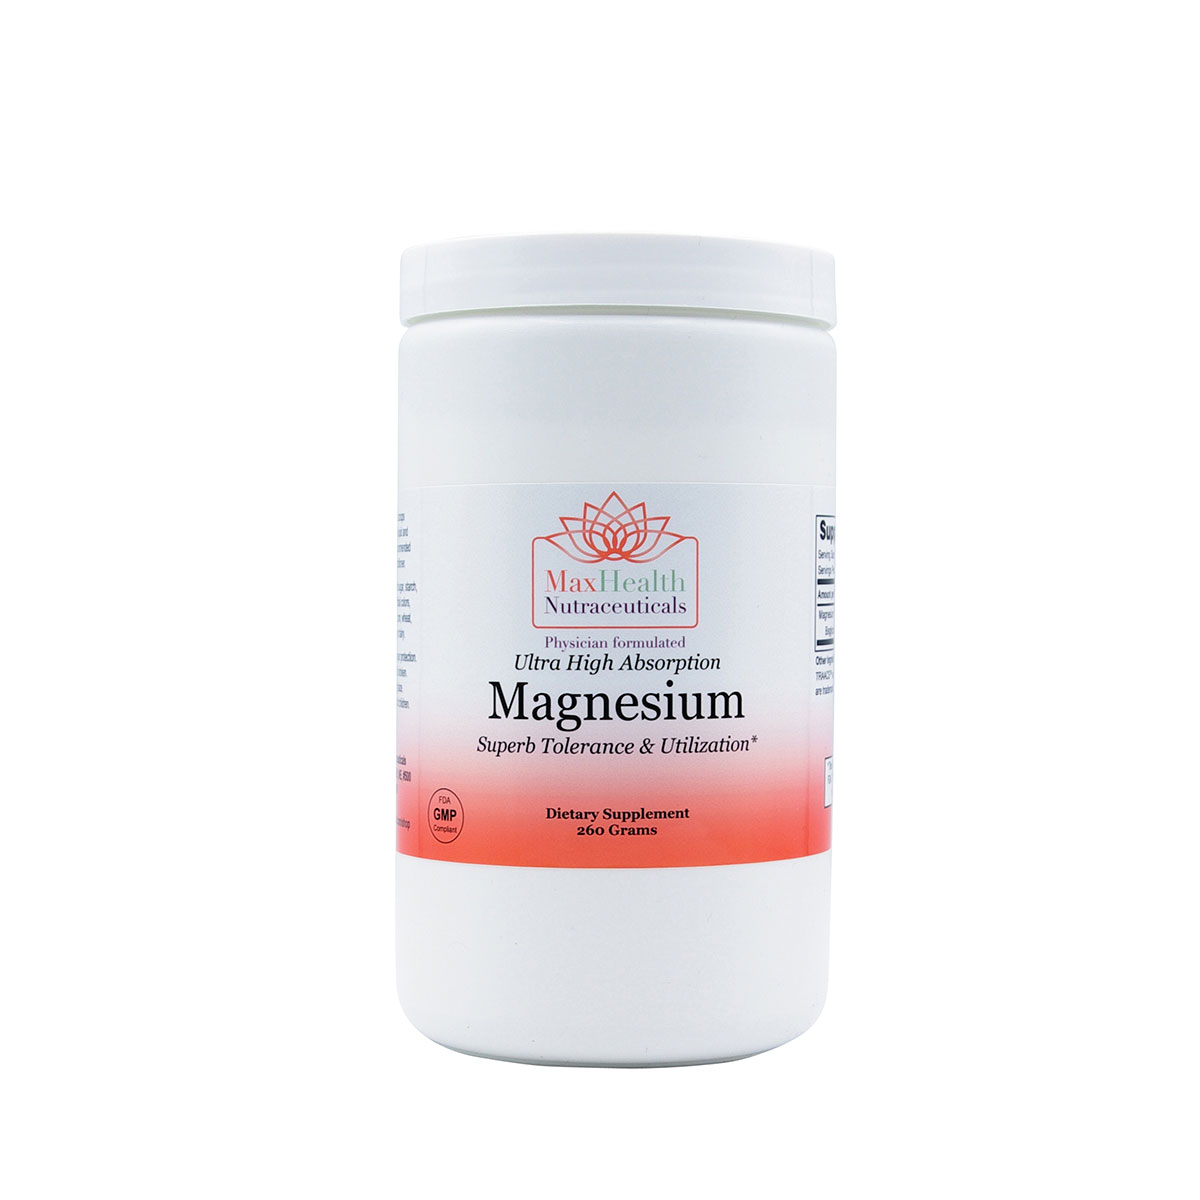 11Ultra High Absorption Magnesium 260grams